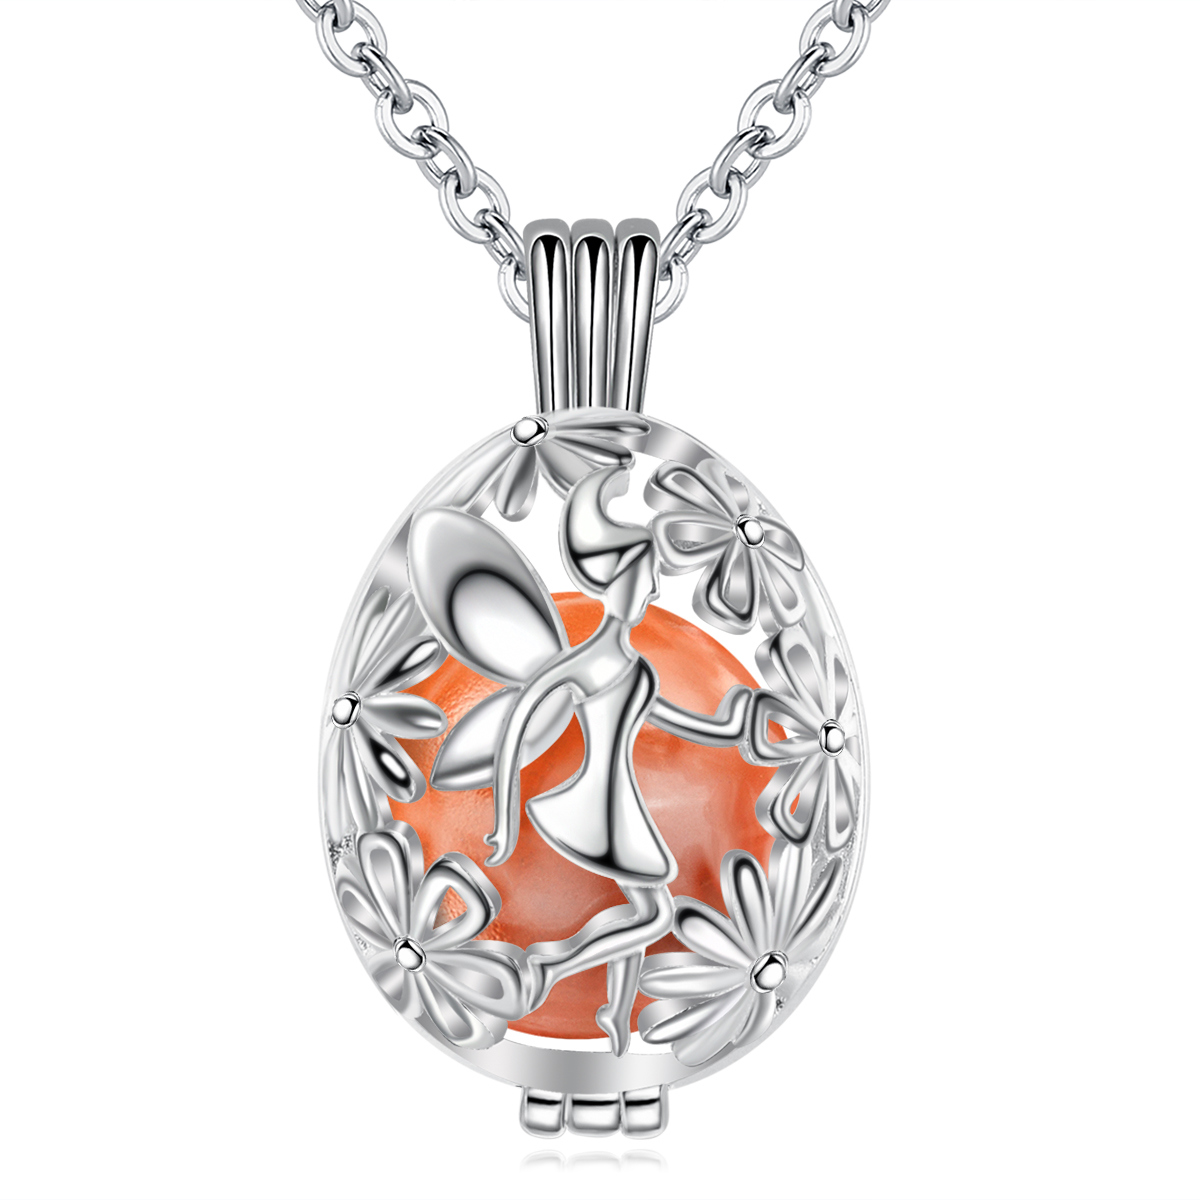 Top material fastness 925 sterling silver cage pendant Flowers elf pattern Essential Oil Diffuser Necklace